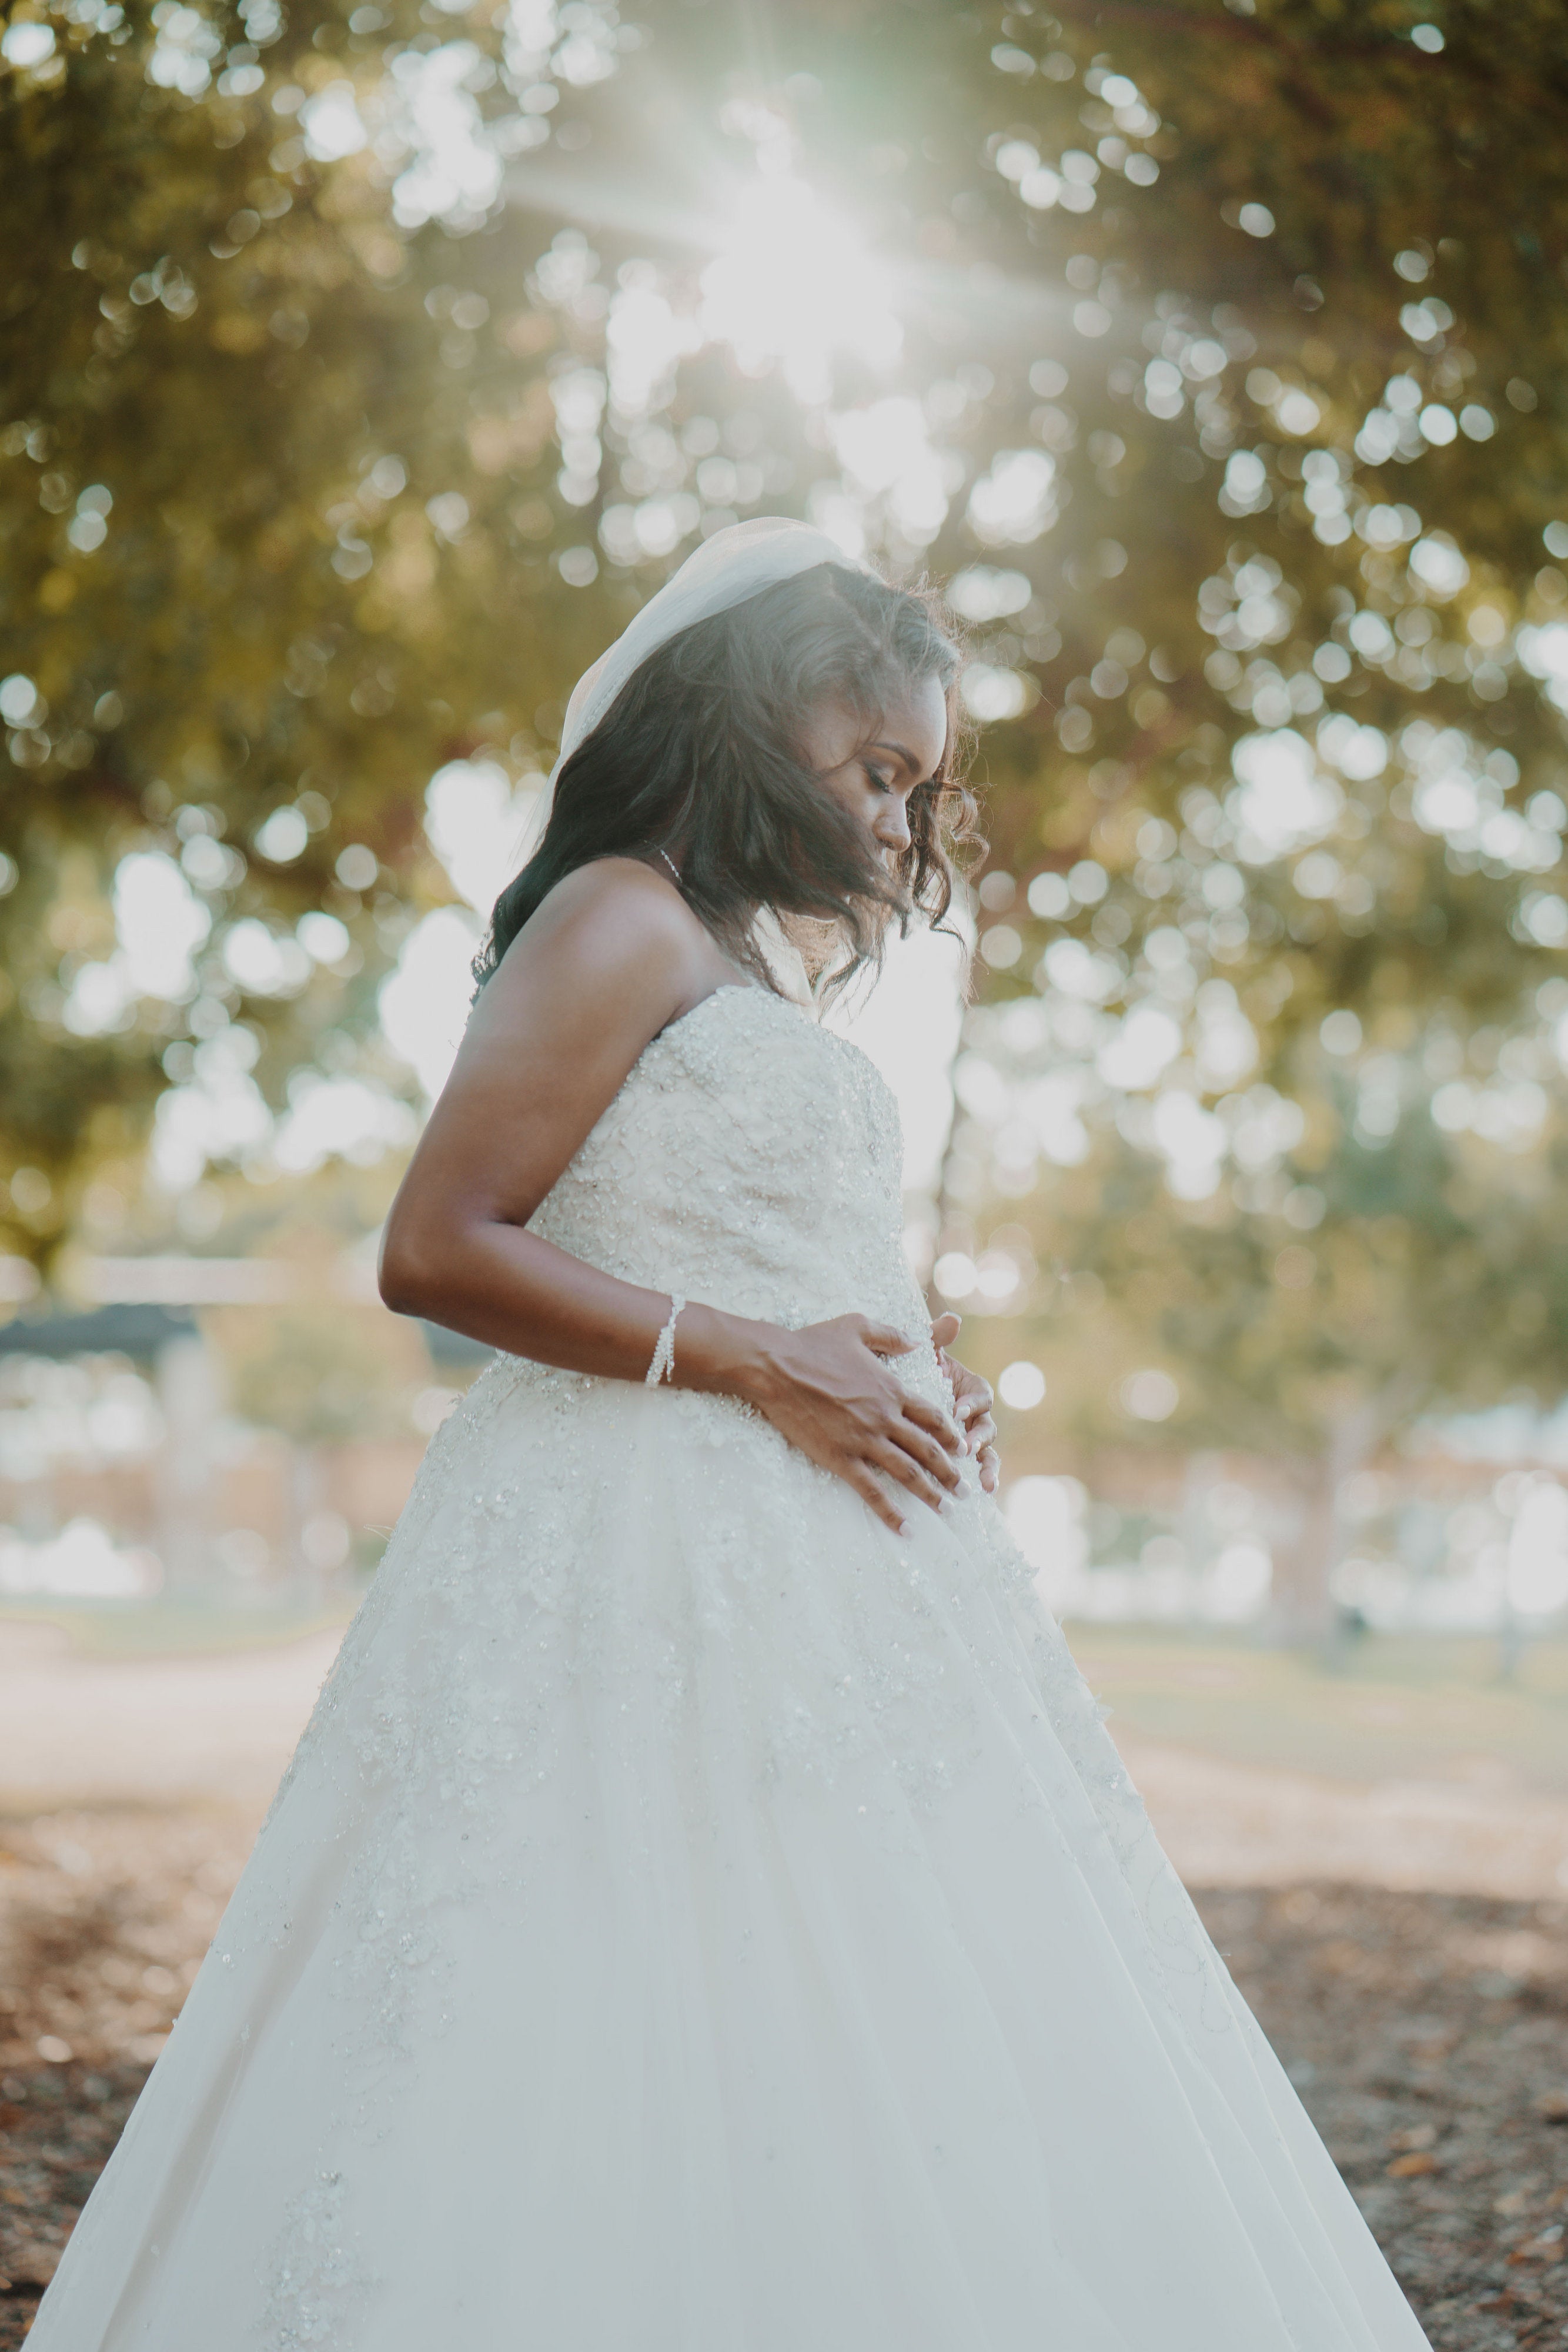 Bridal Bliss: Tiera and Oluwaseyi's Romantic Wedding Photos Will Leave You Swooning
